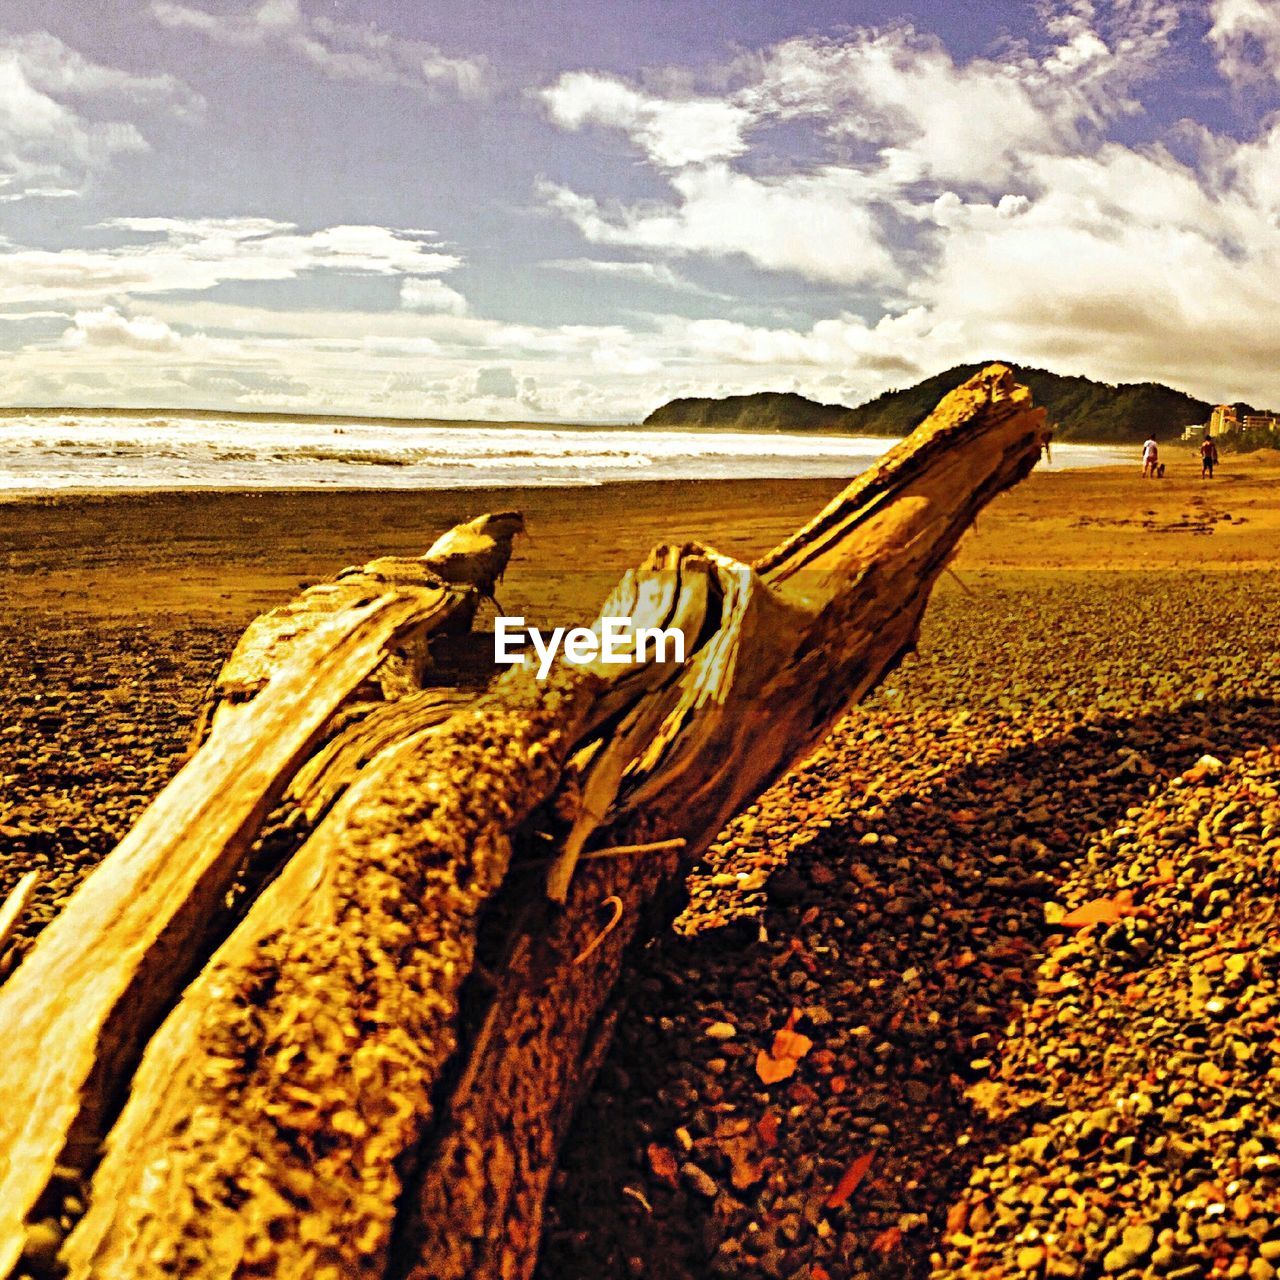 AERIAL VIEW OF DRIFTWOOD ON BEACH